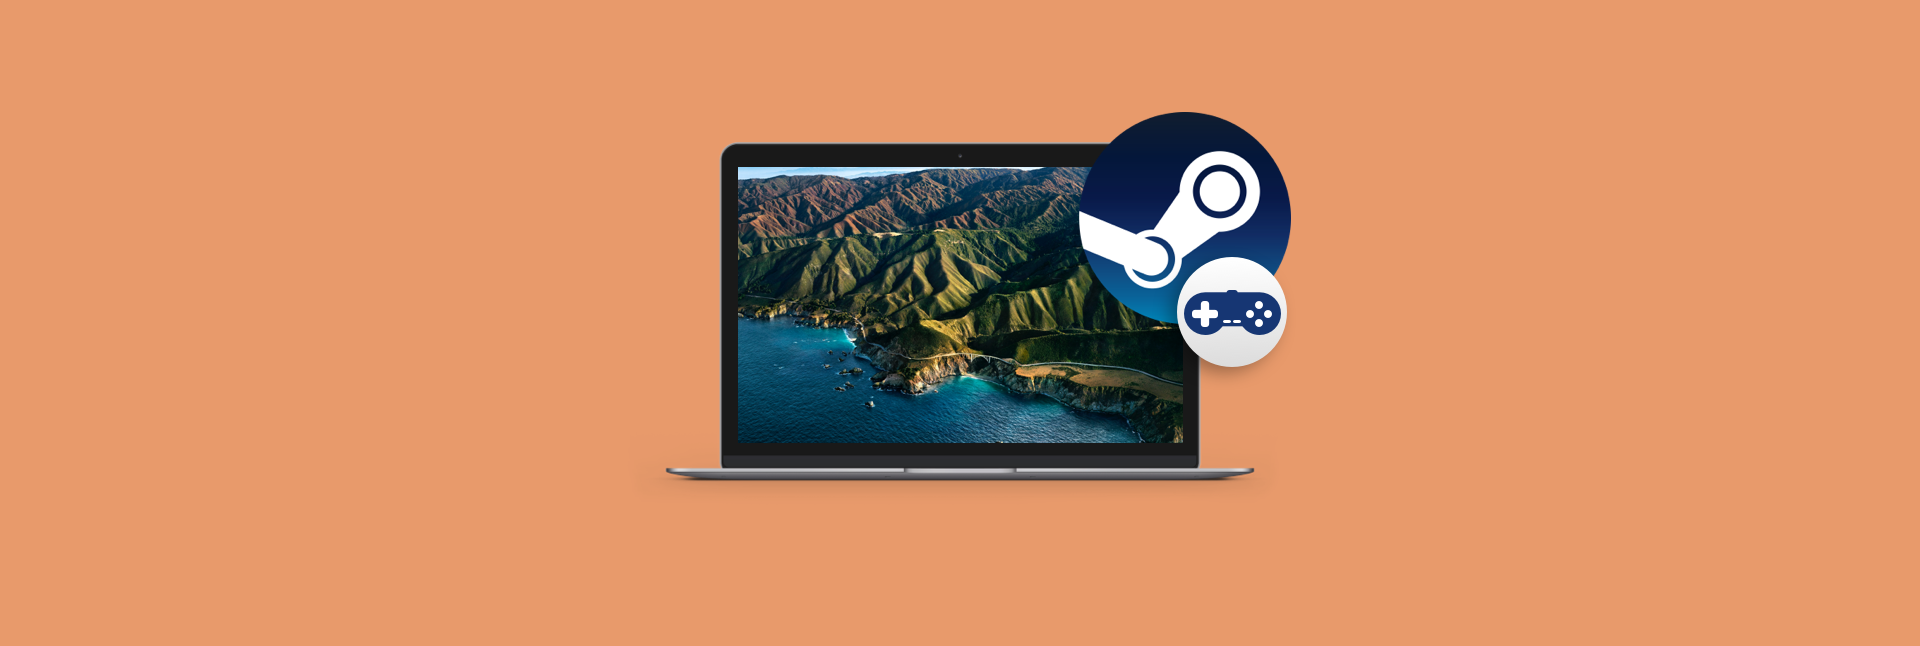 websites like steam download games for free mac